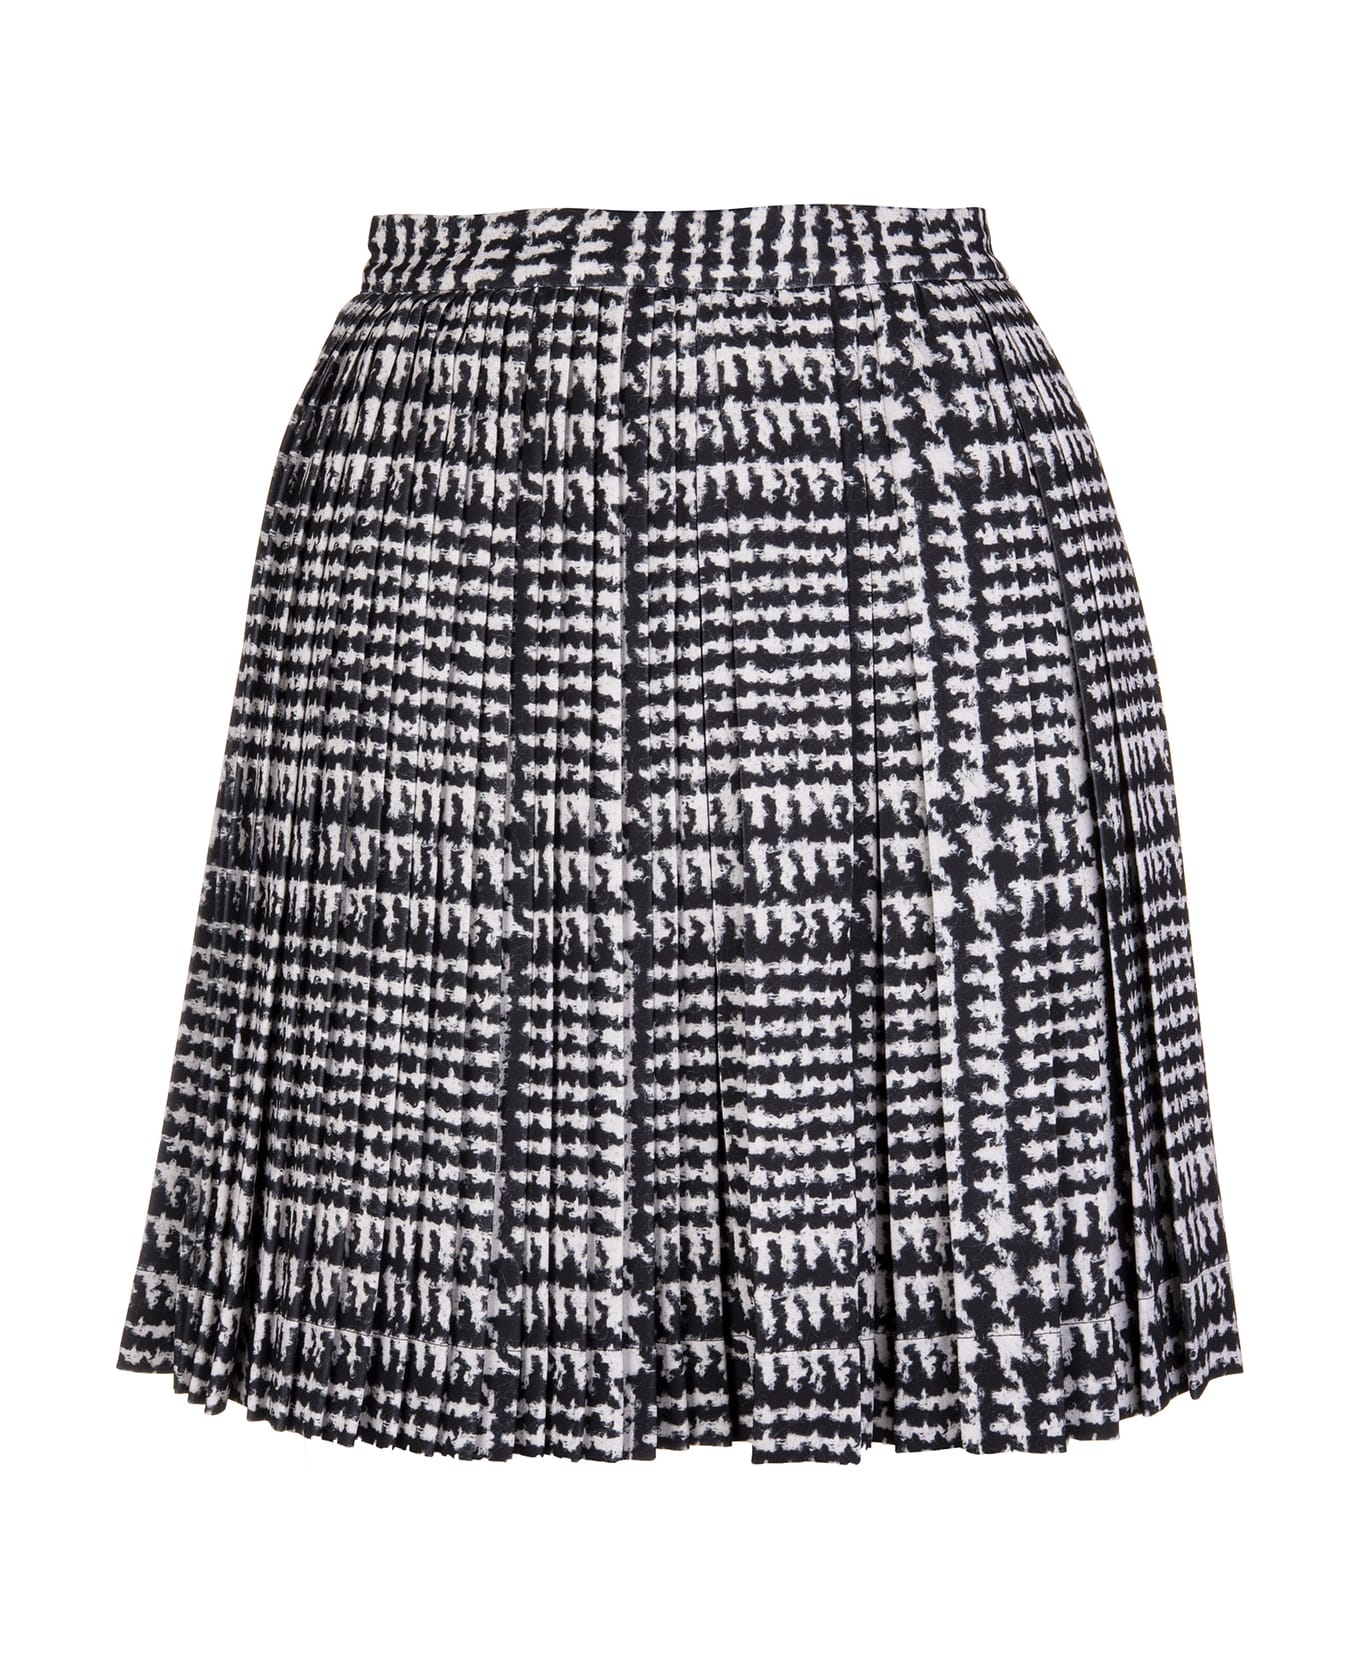 Ermanno Scervino Cady Trouser Skirt With Prince Of Wales Print - BLACK/WHITE スカート